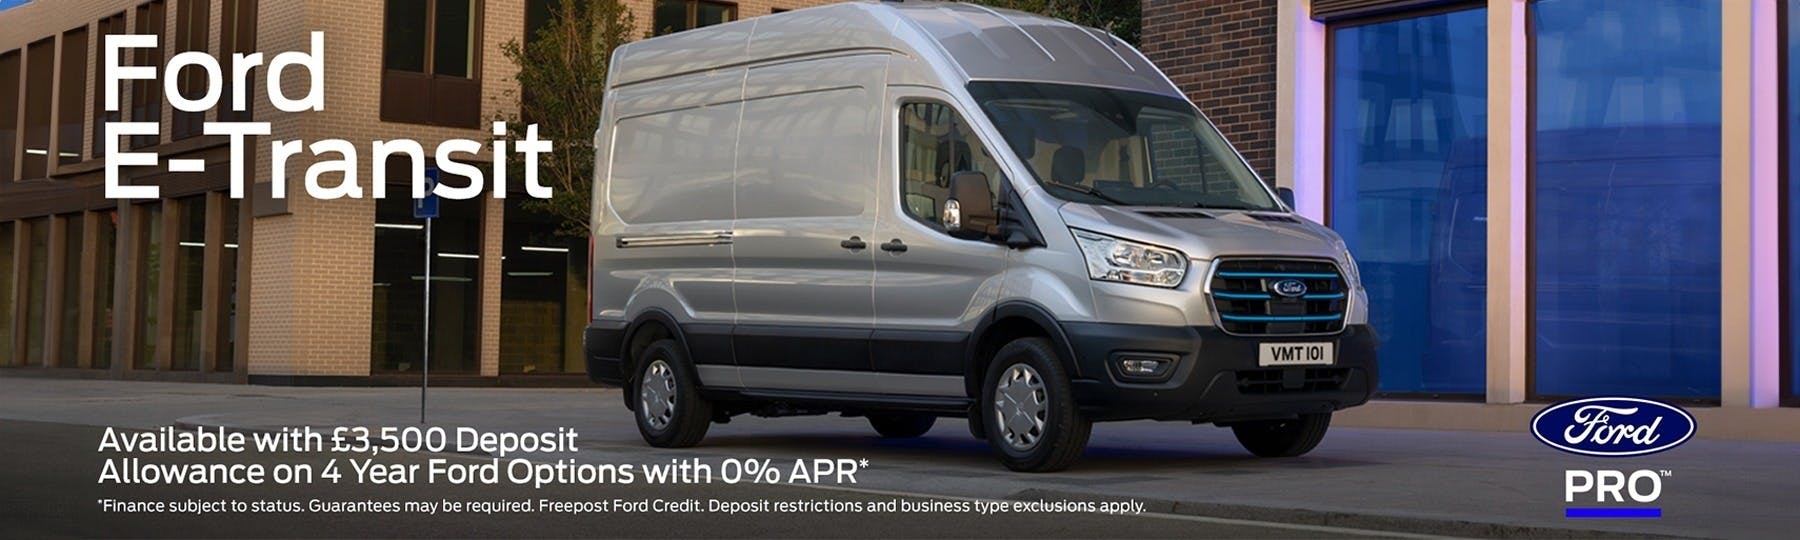 All-Electric Ford E-Transit New Van Offer